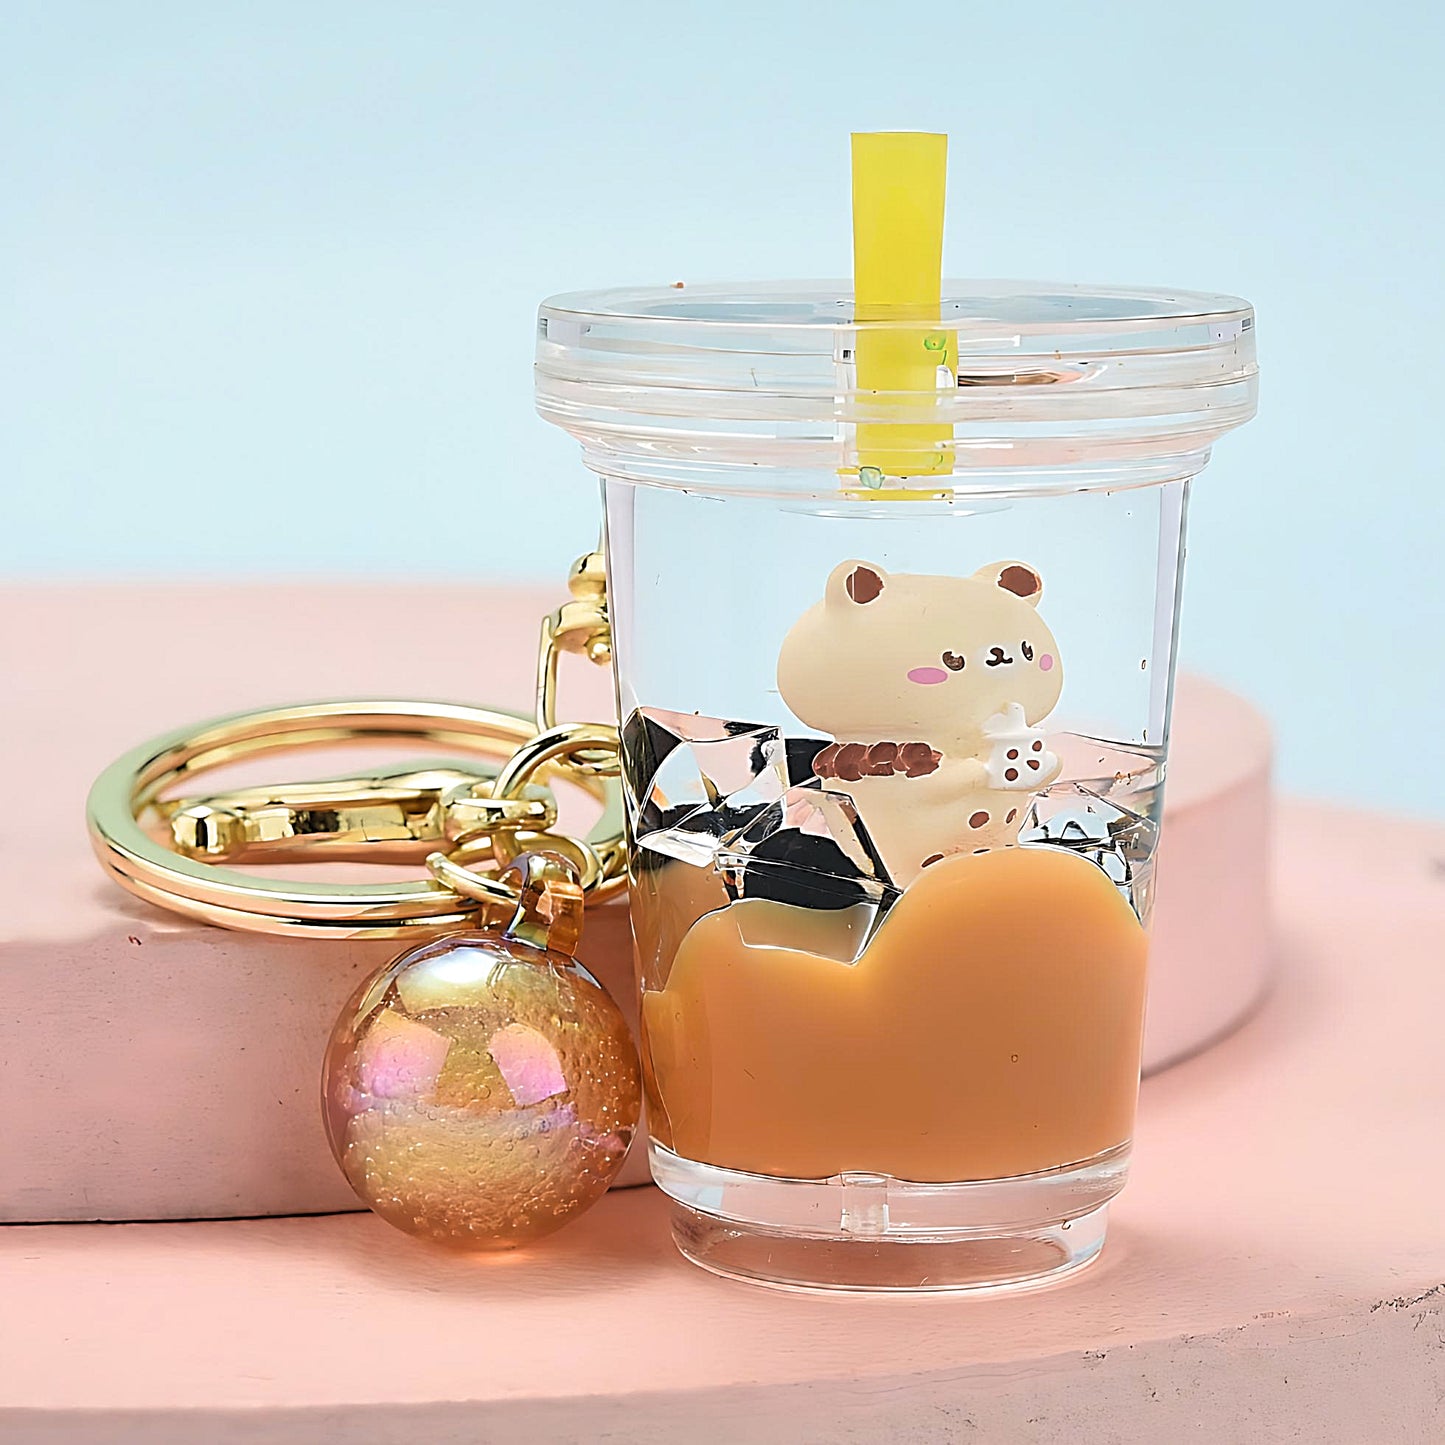 a Bubble Tea keychain on a pink display, blue background